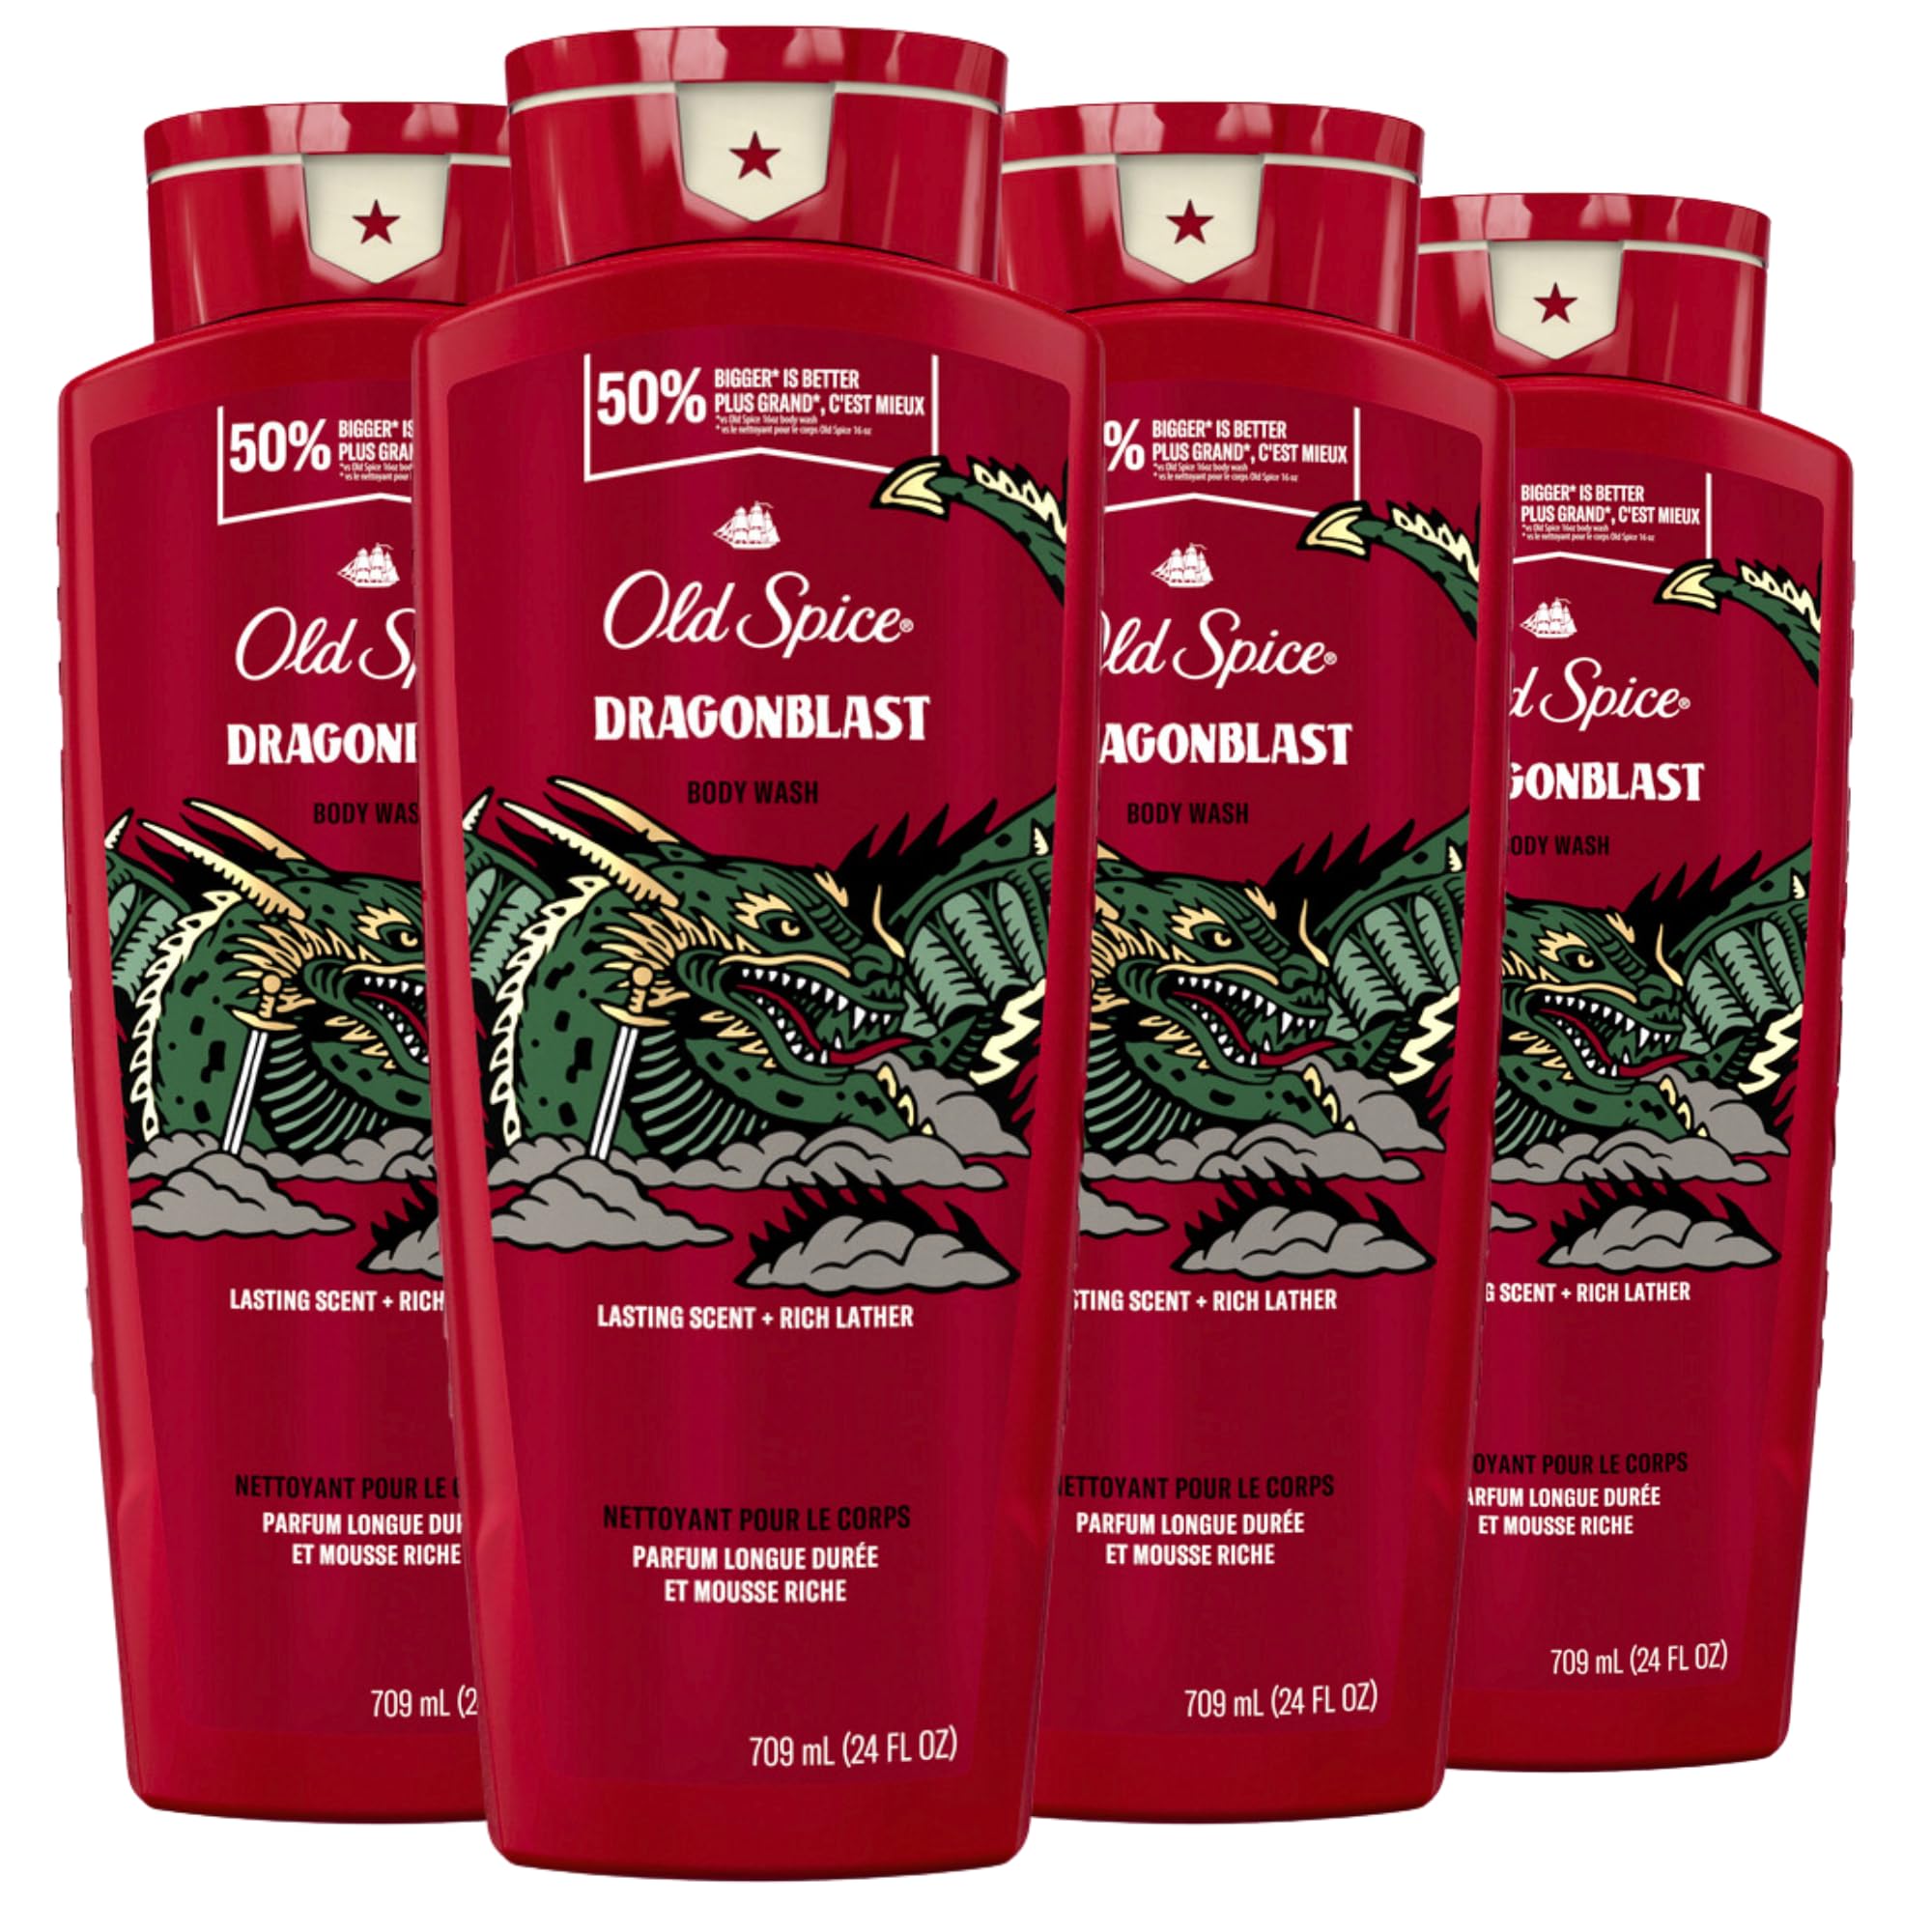 Old Spice Body Wash for Men, Dragonblast, Long Lasting Lather, 24 fl oz (Pack of 4)